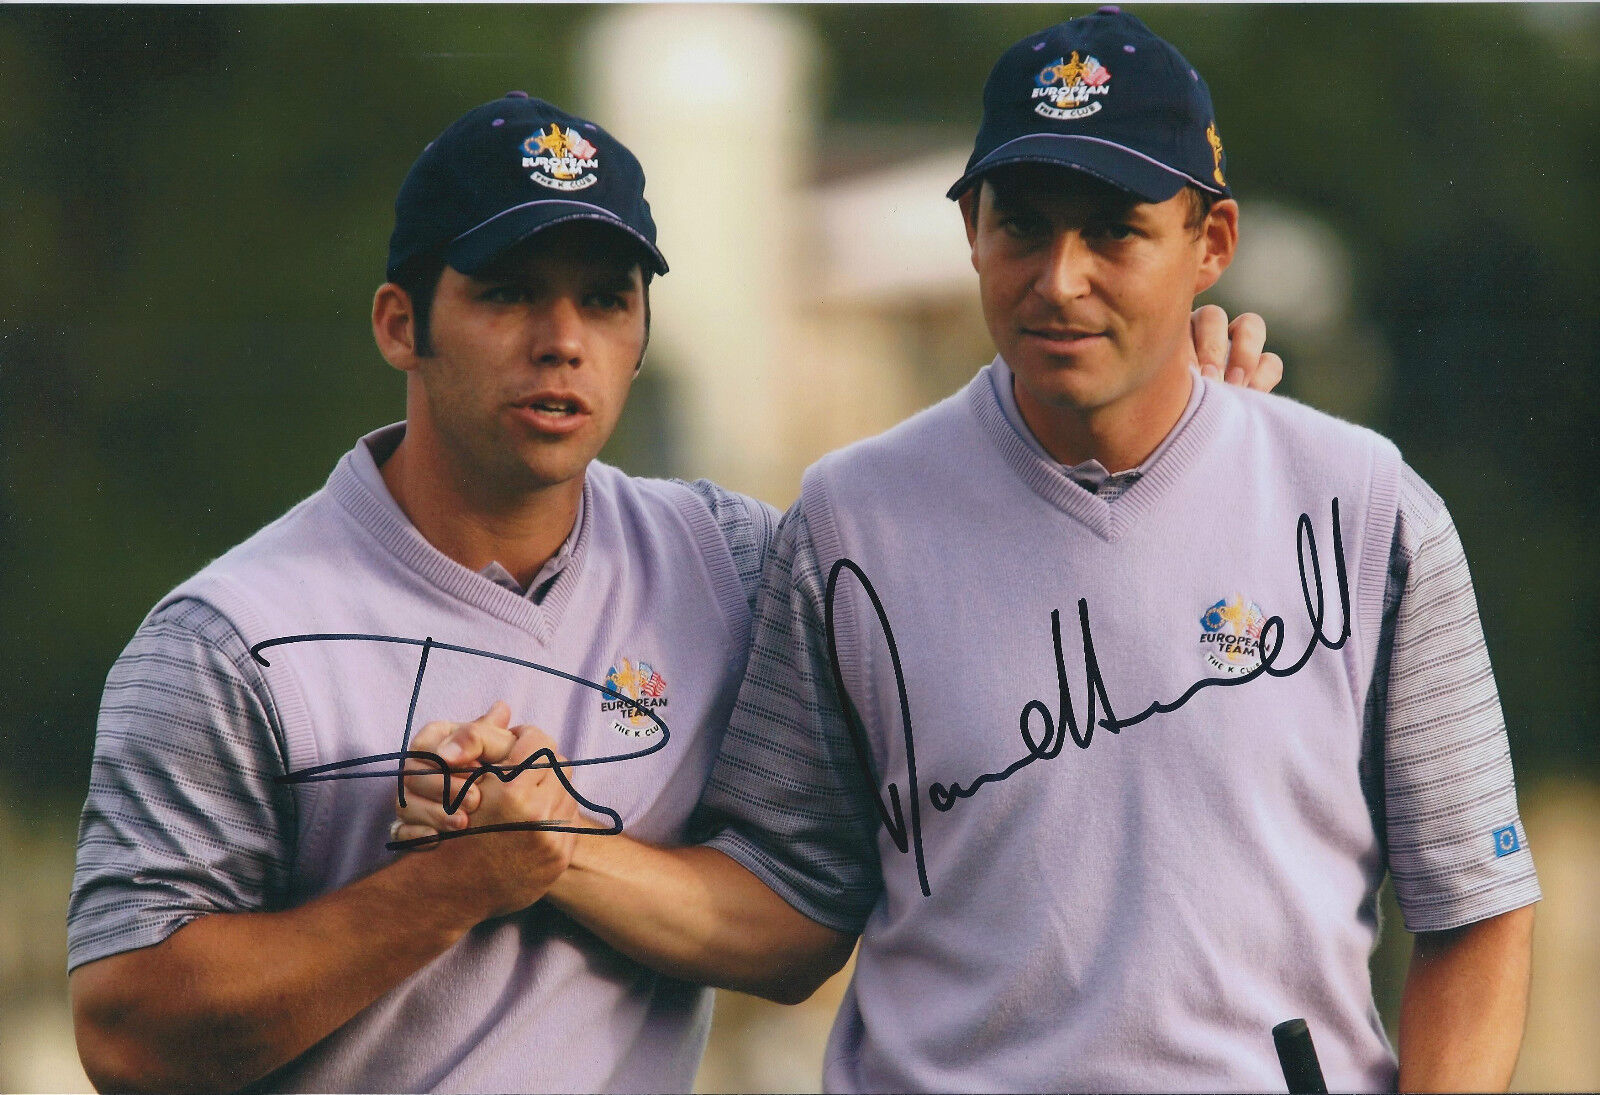 Paul CASEY & David HOWELL RARE SIGNED Autograph 12x8 Photo Poster painting AFTAL COA RYDER CUP